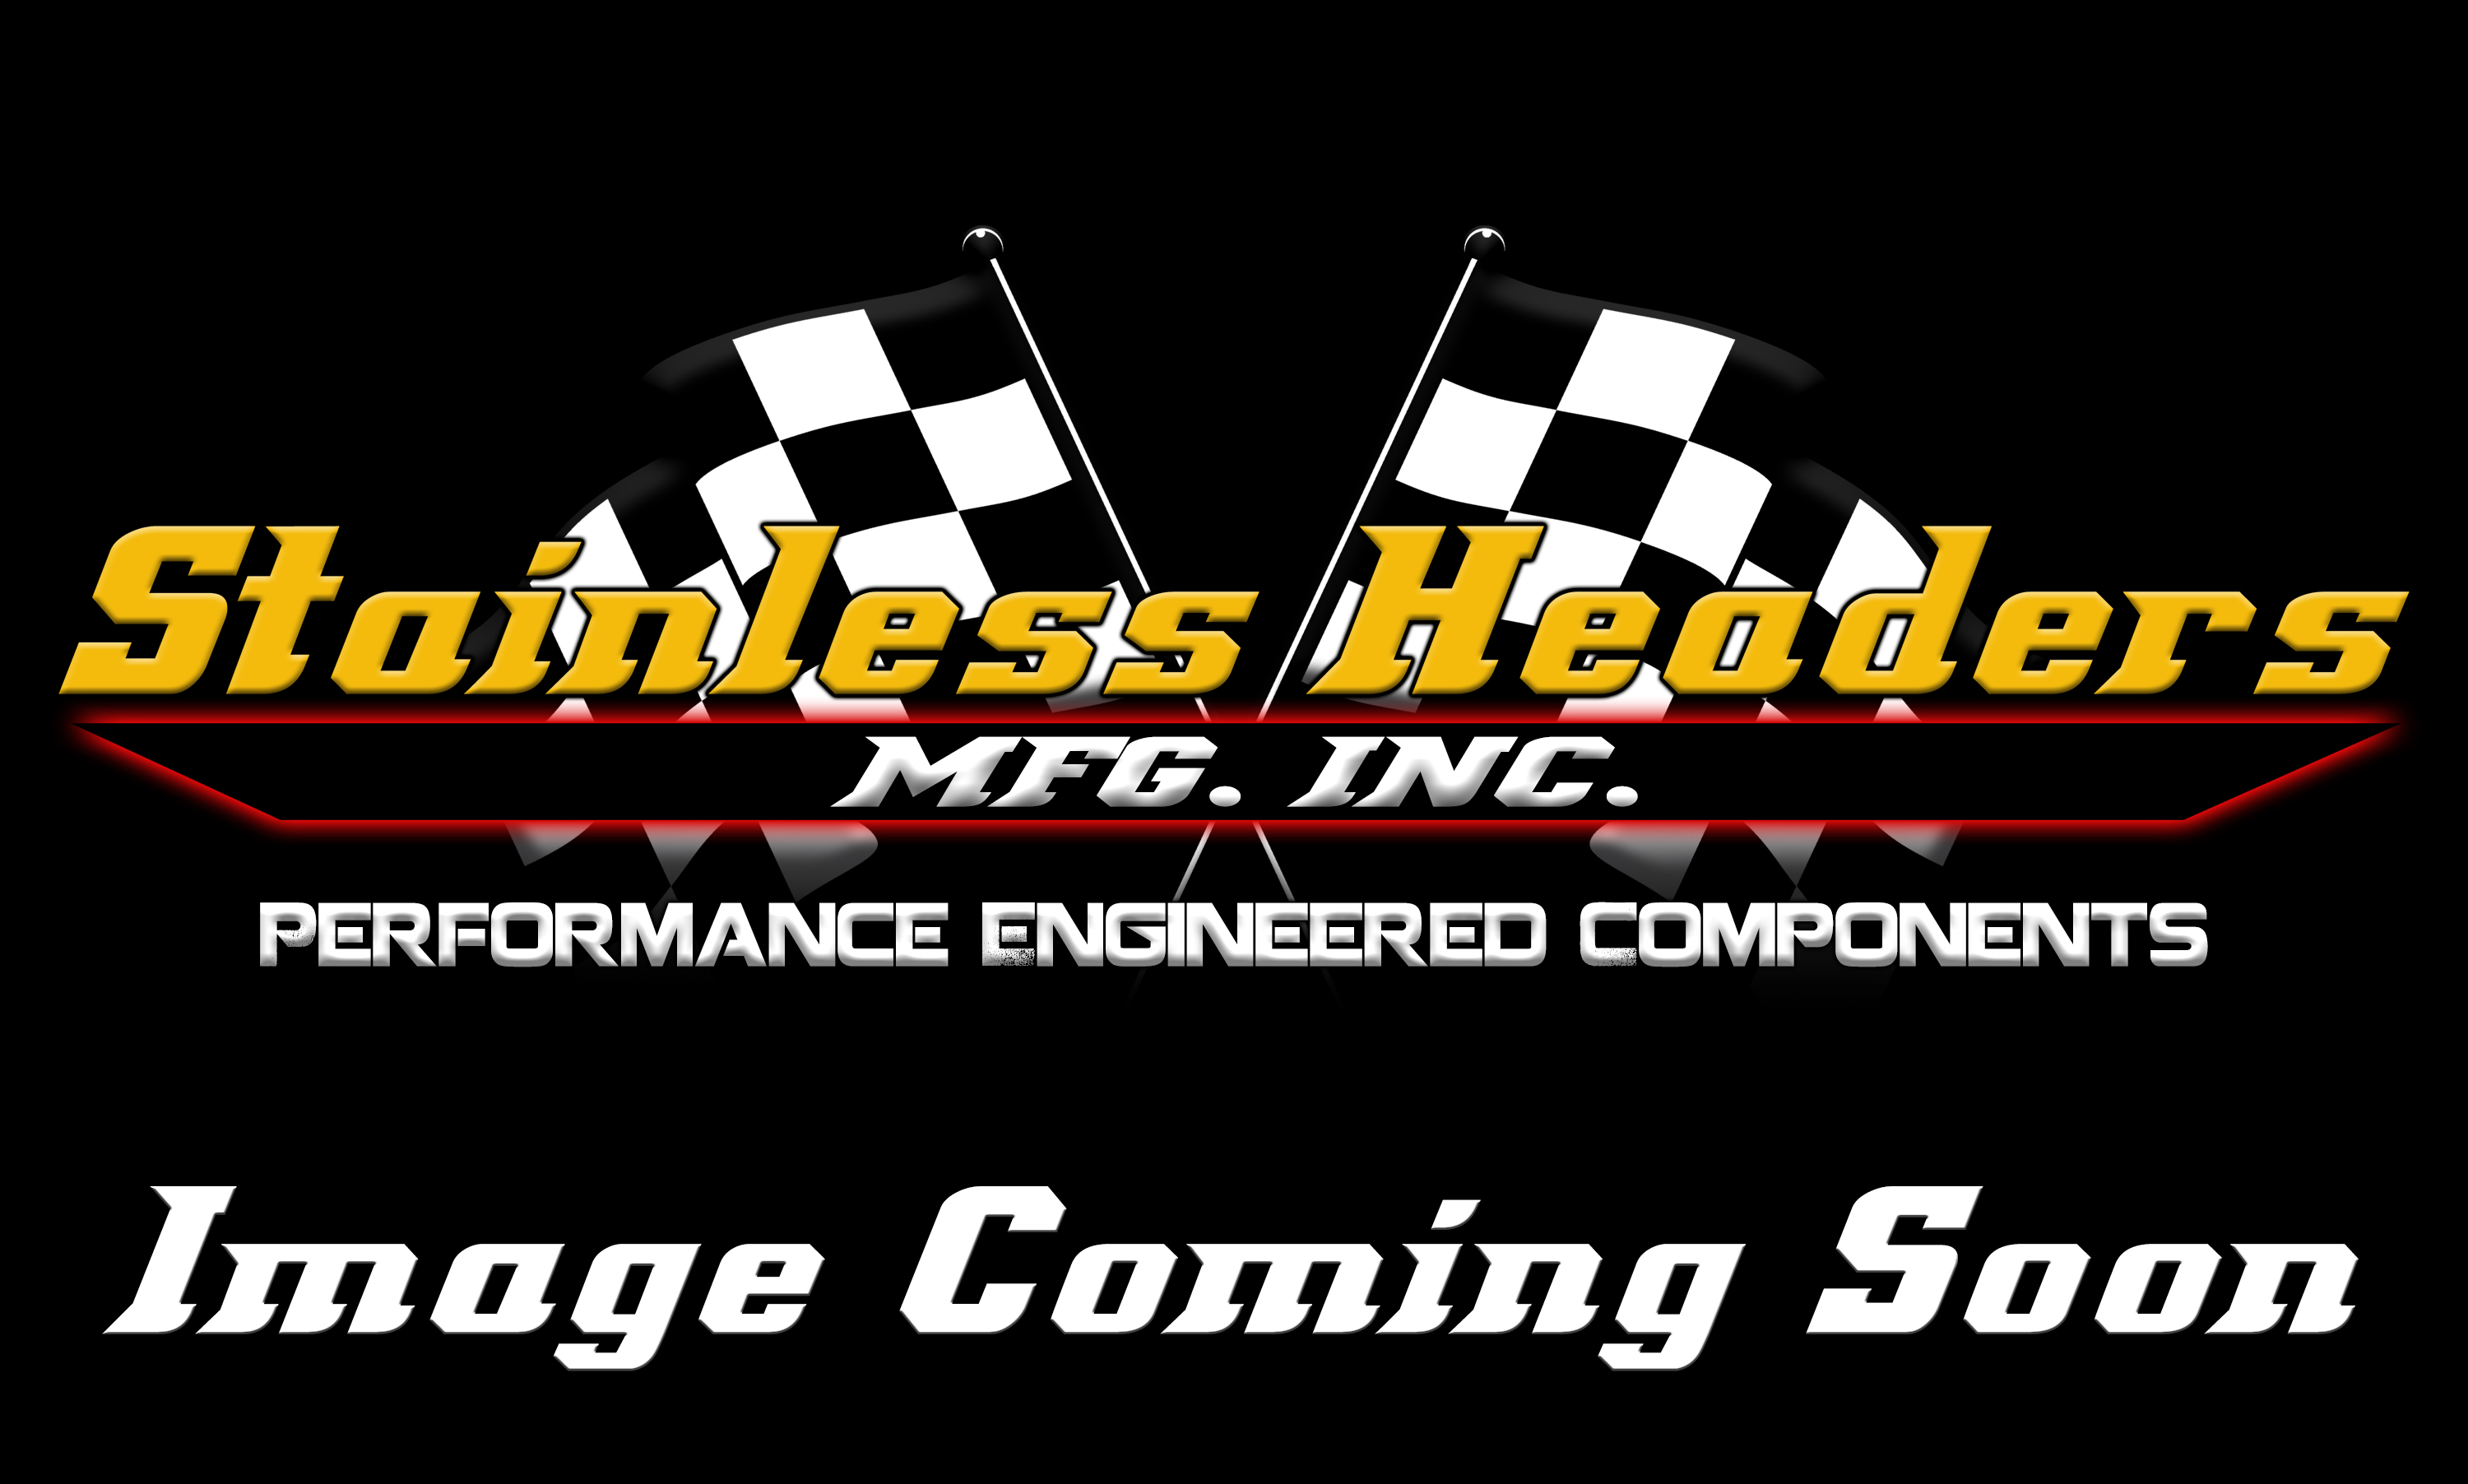 CompTurbo Technologies - CTR4818R-8090 Mid Frame Oil Lubricated 2.0 Turbocharger (1350 HP)